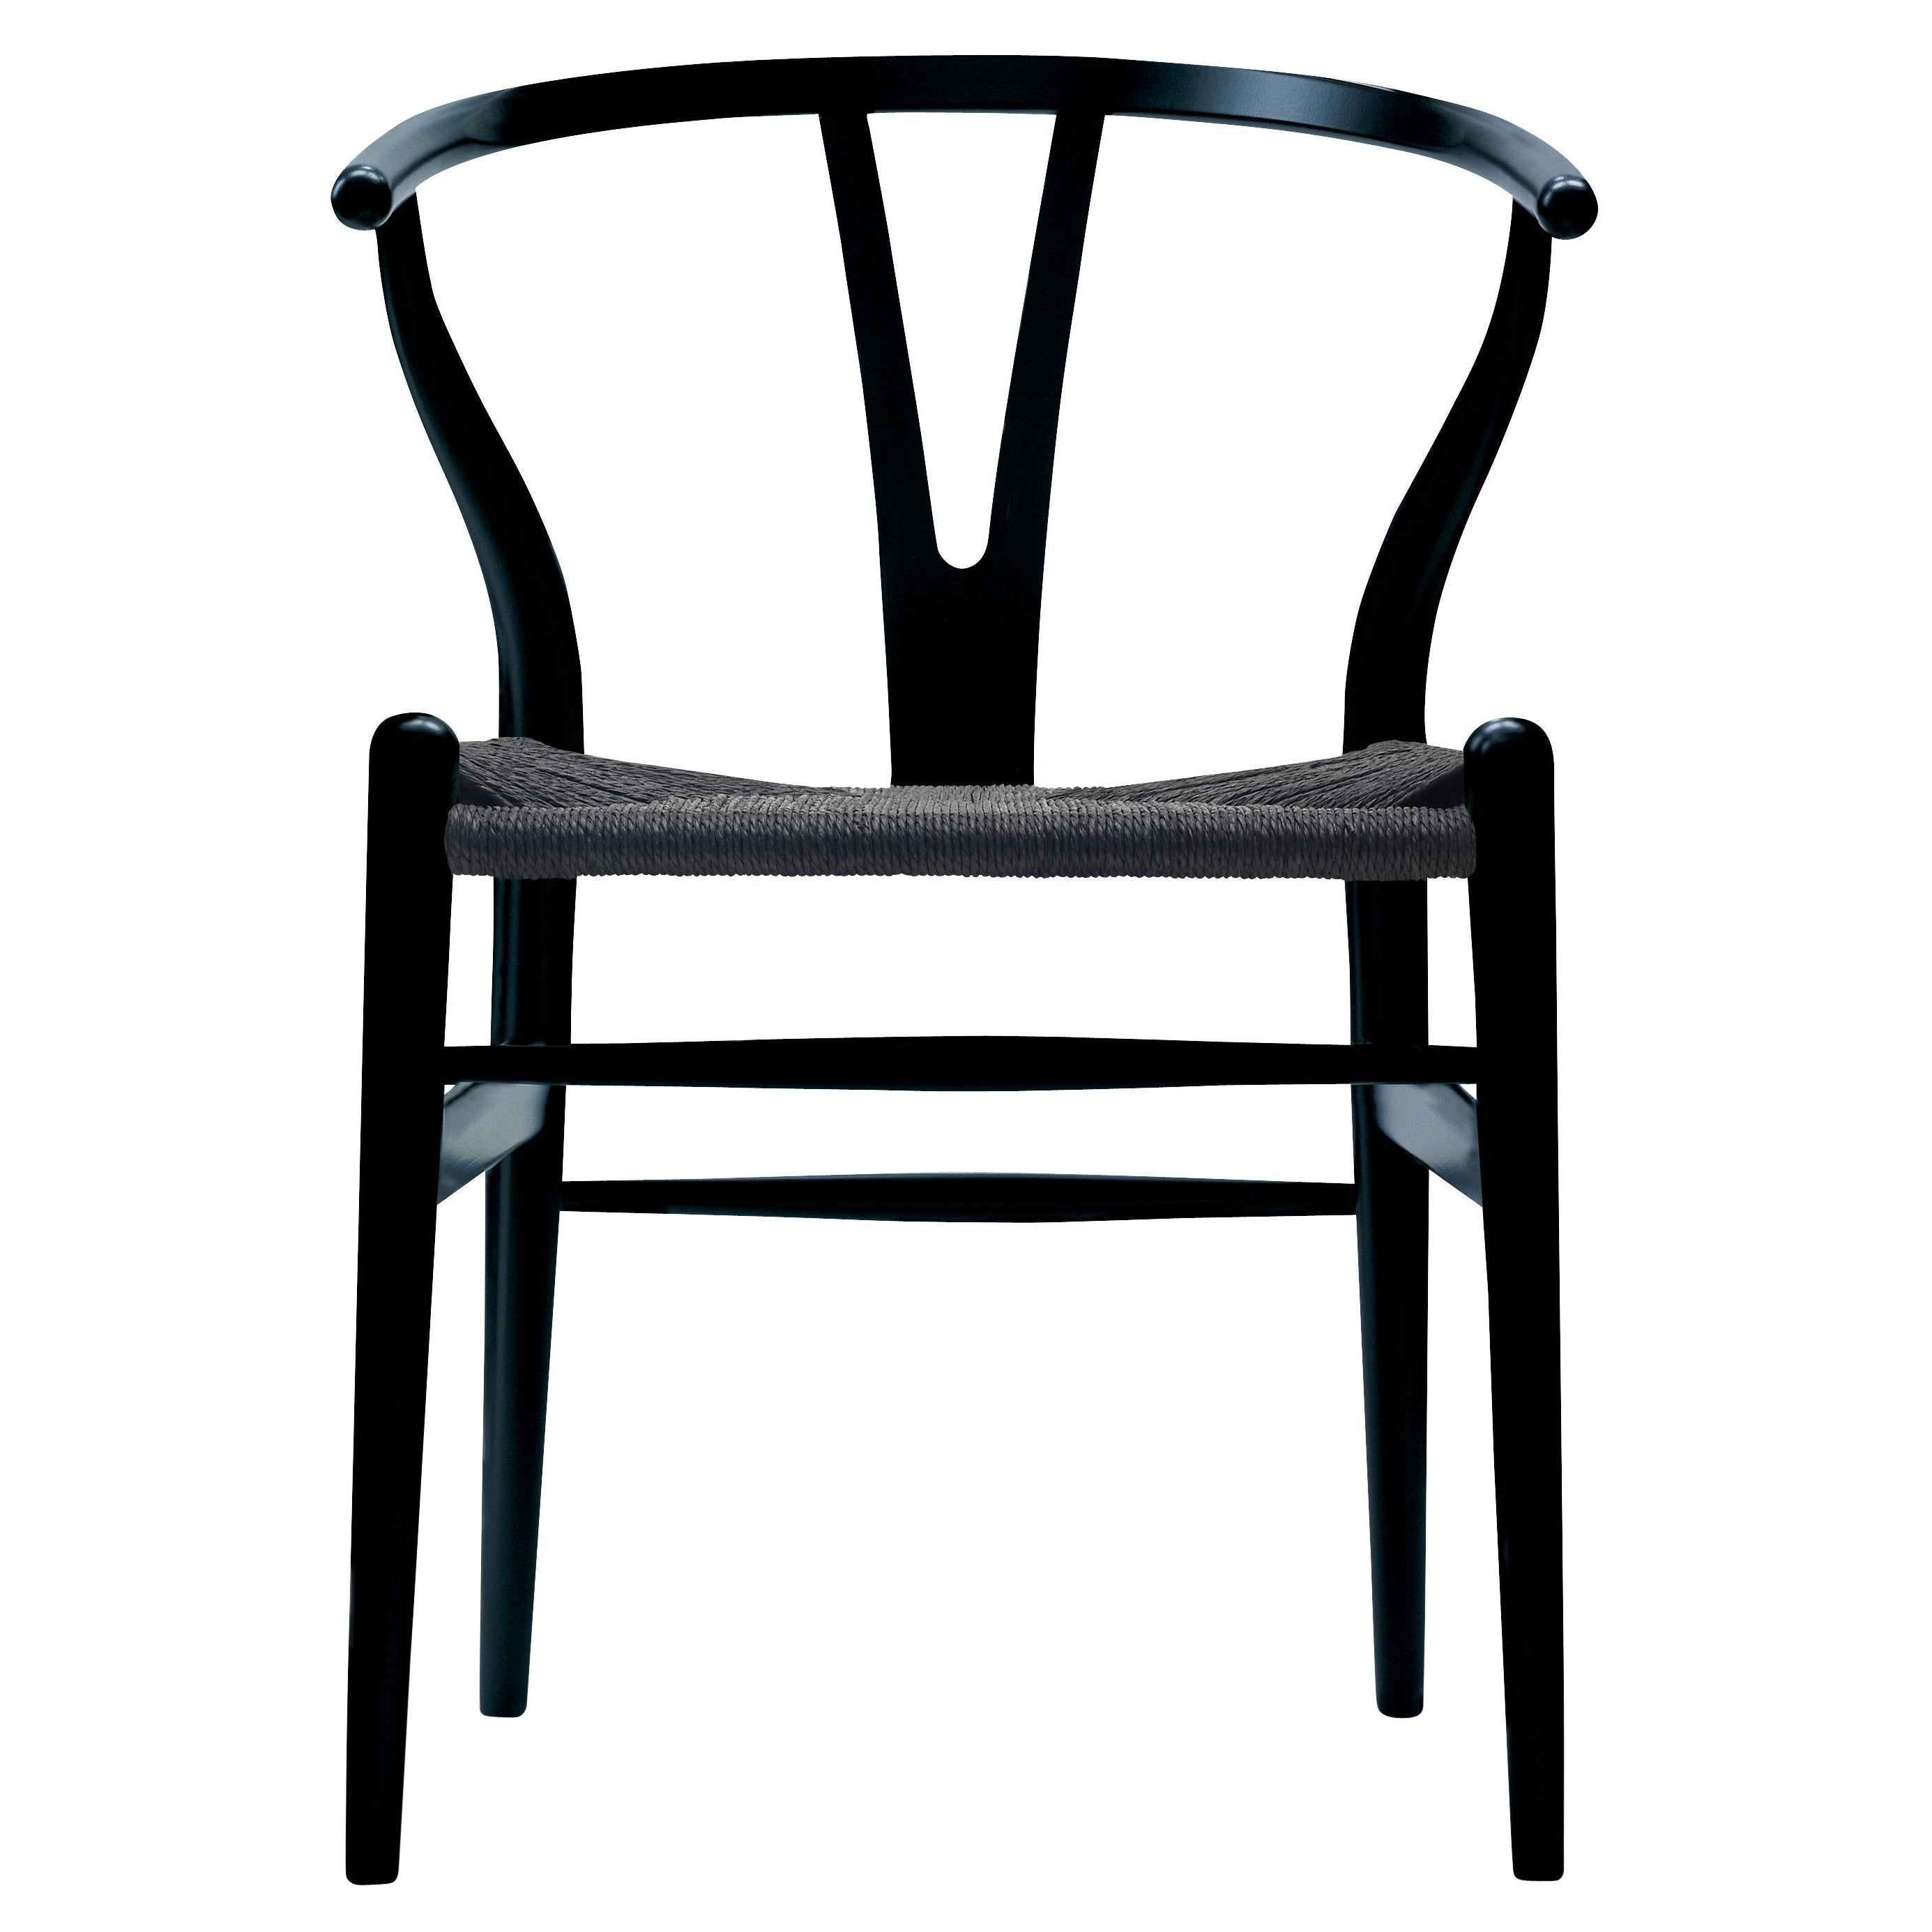 CH24 Wishbone Chair in Black with Black Papercord Seat by Hans Wegner